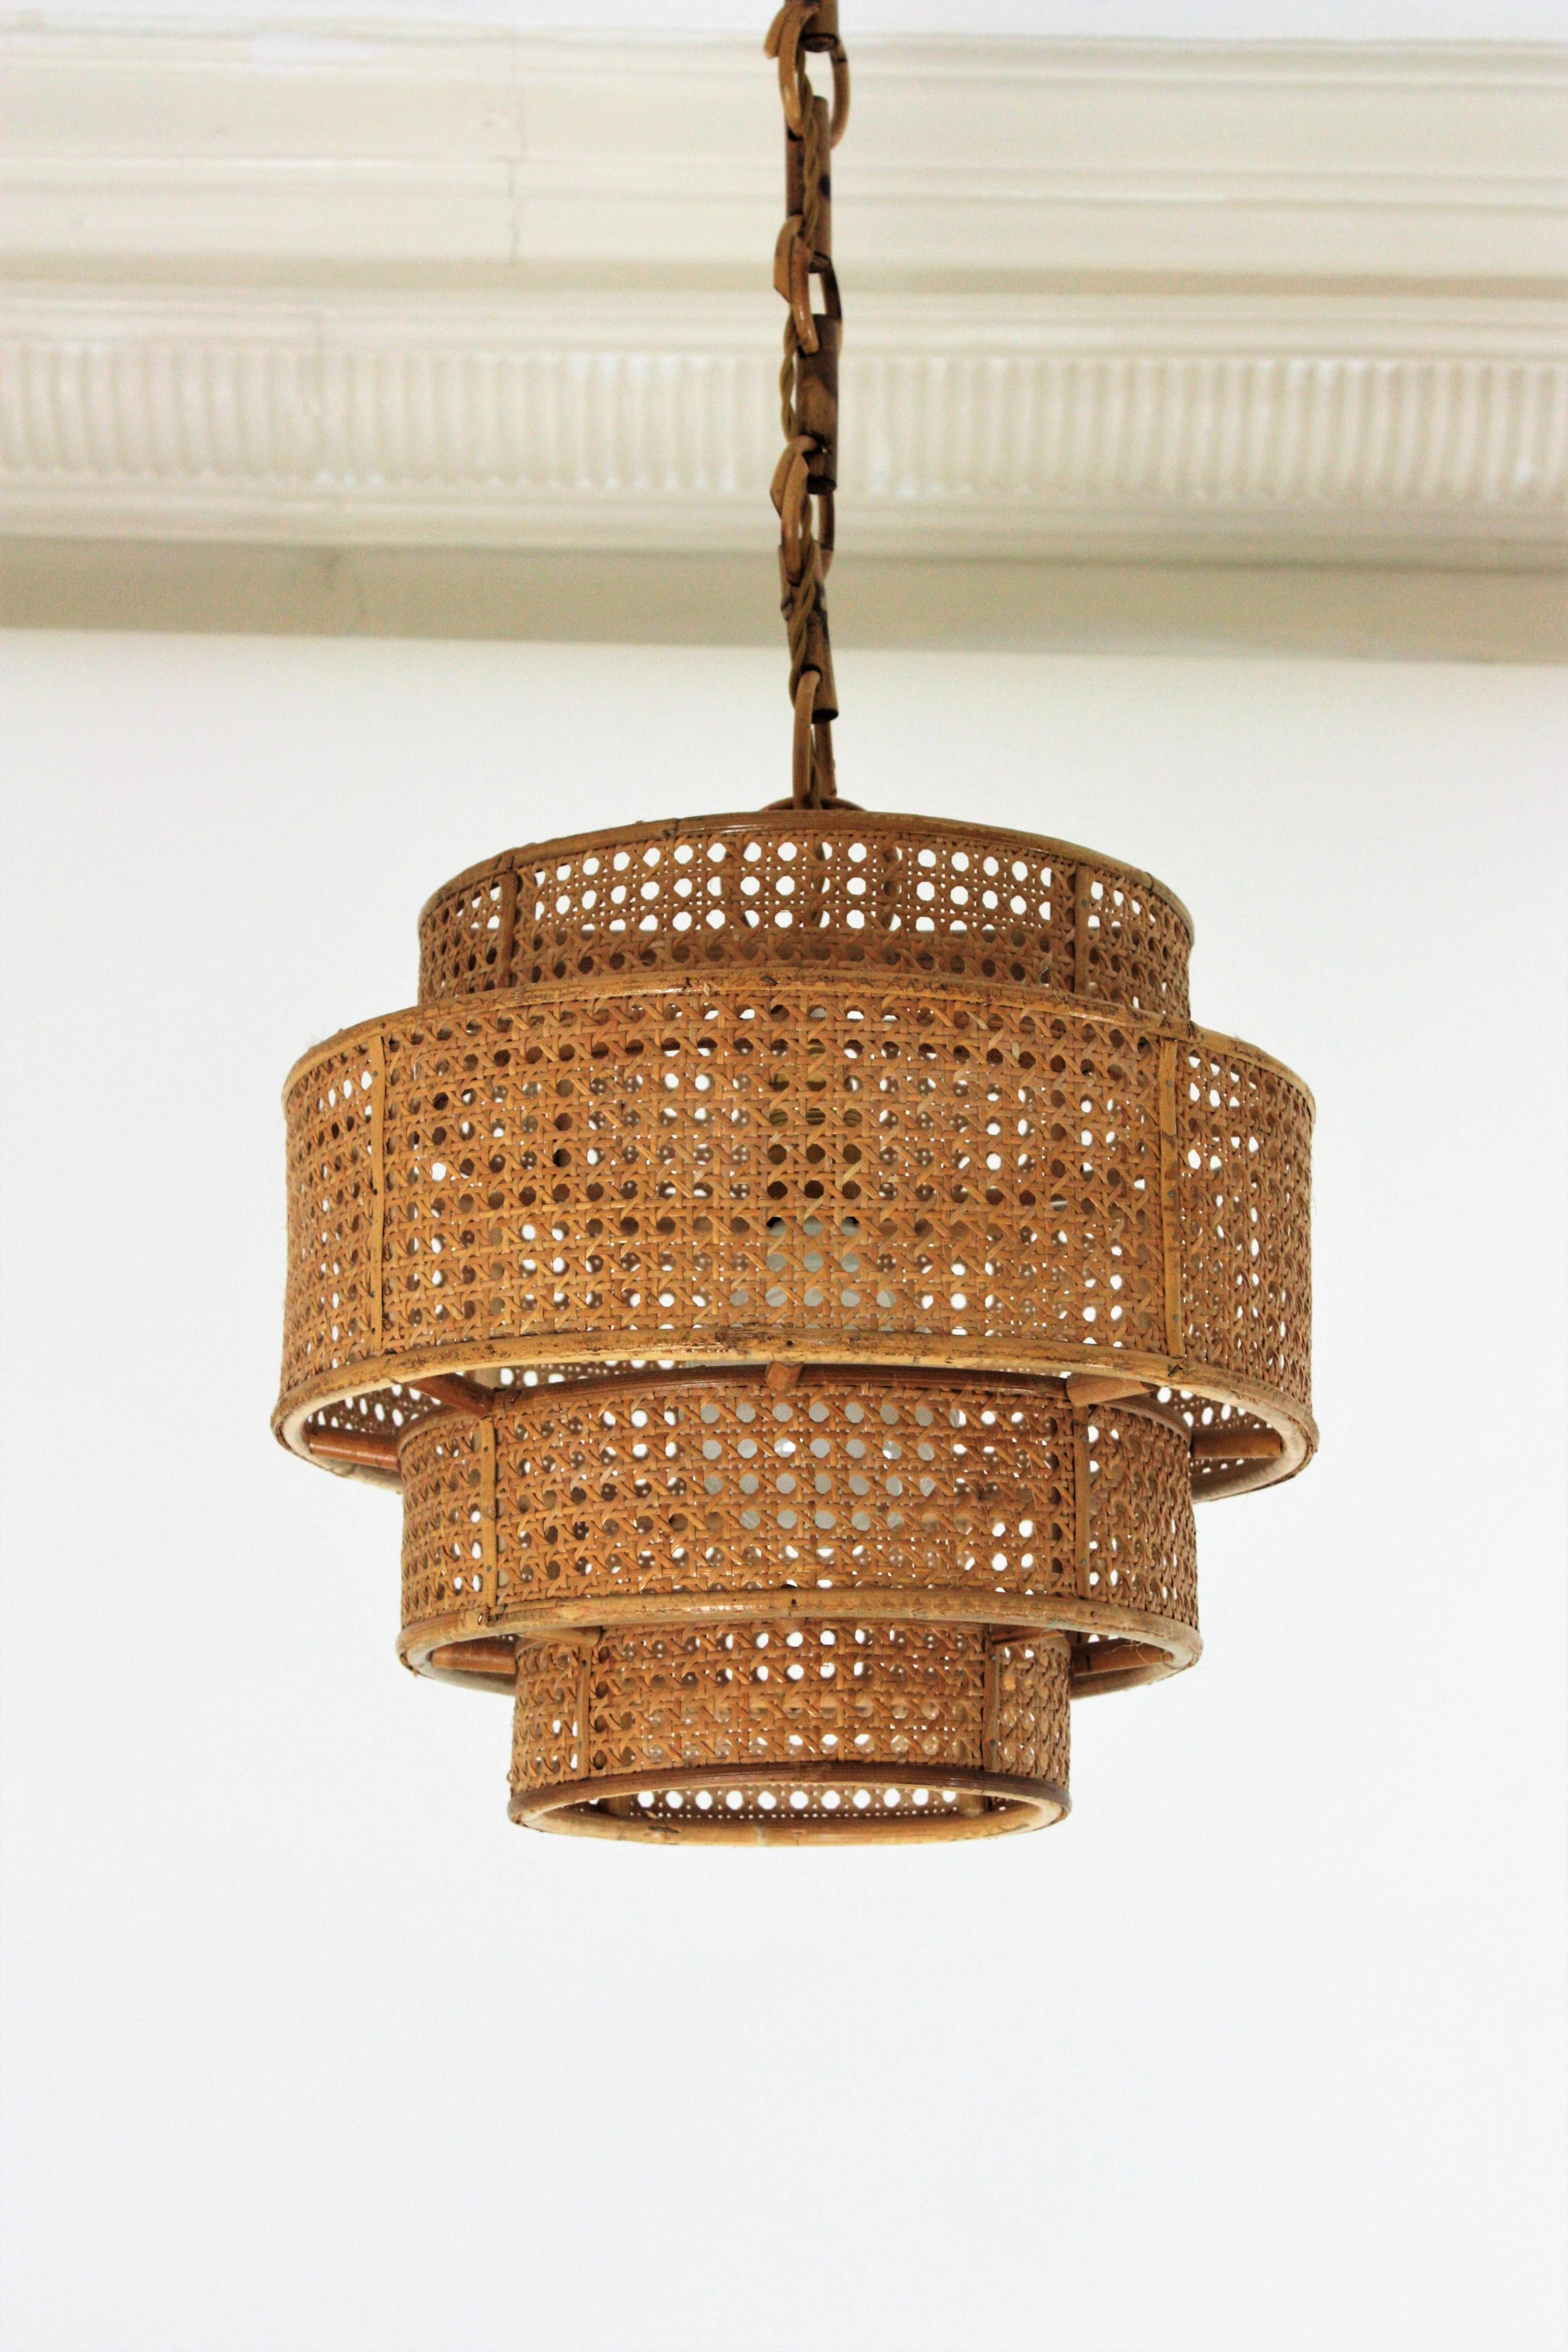 20th Century  Rattan Wicker Weave Concentric Cylinder Pendant Hanging Light  For Sale